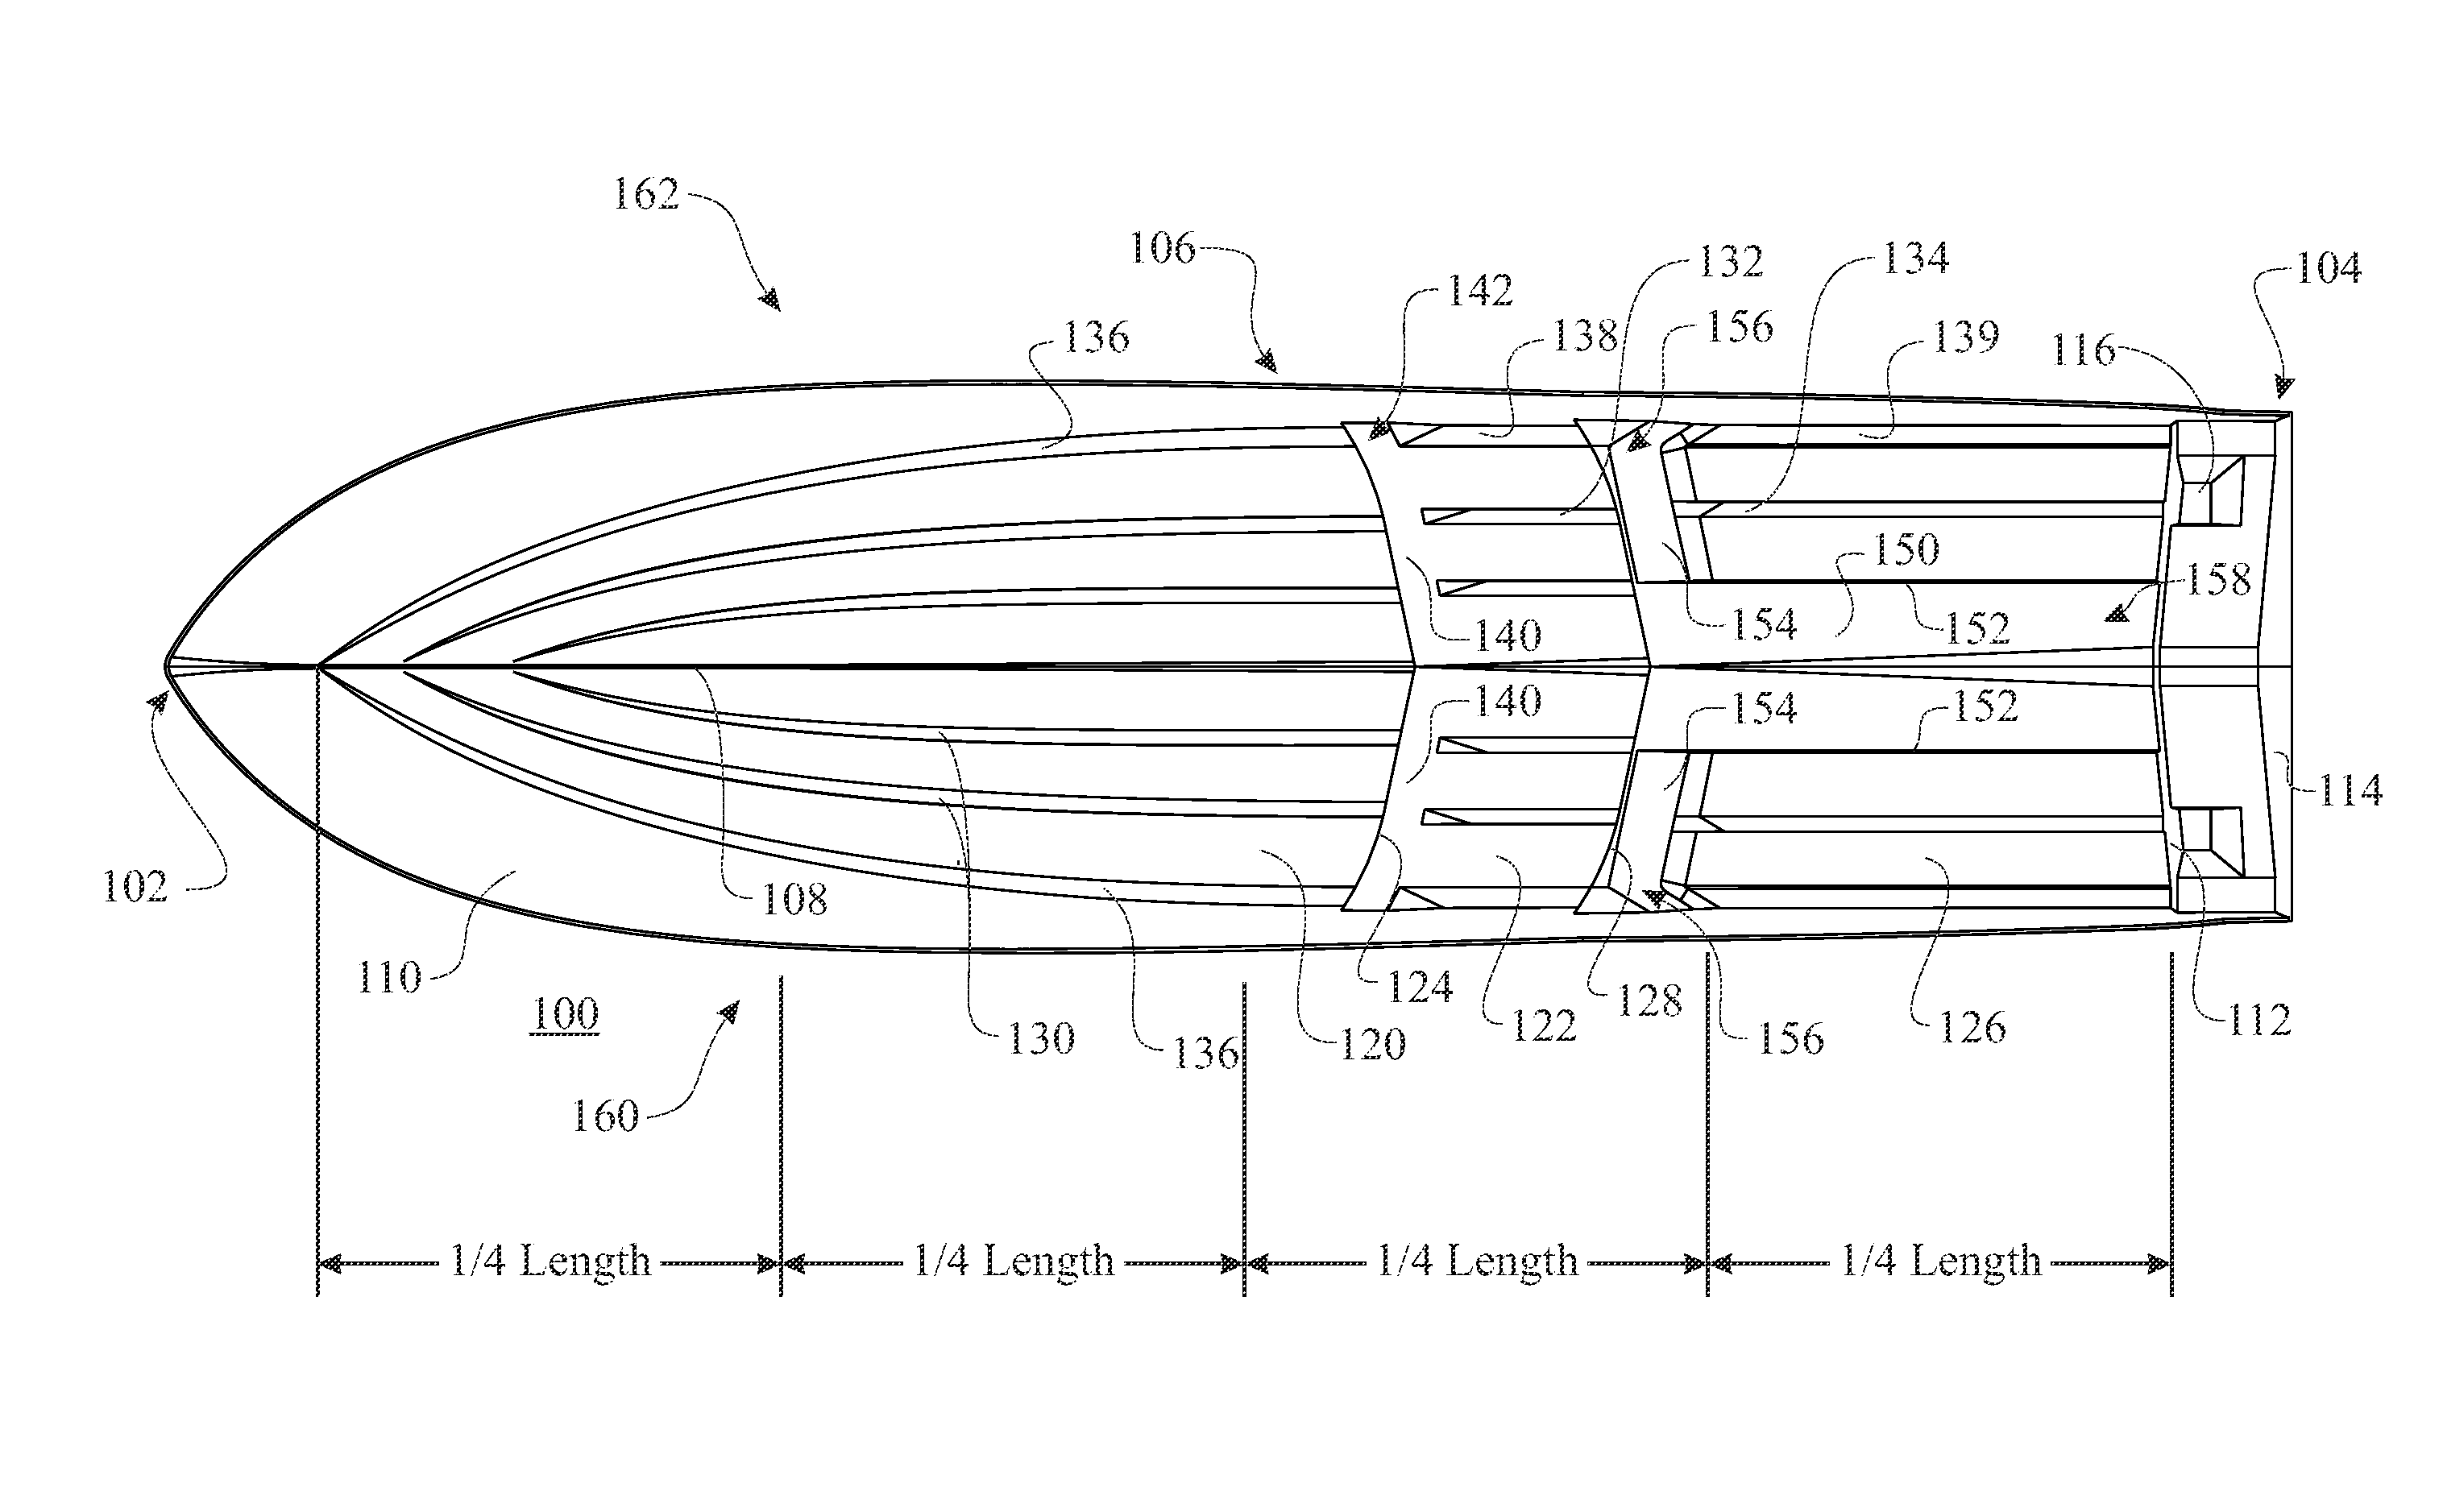 Stabilized step hull utilizing a ventilated tunnel